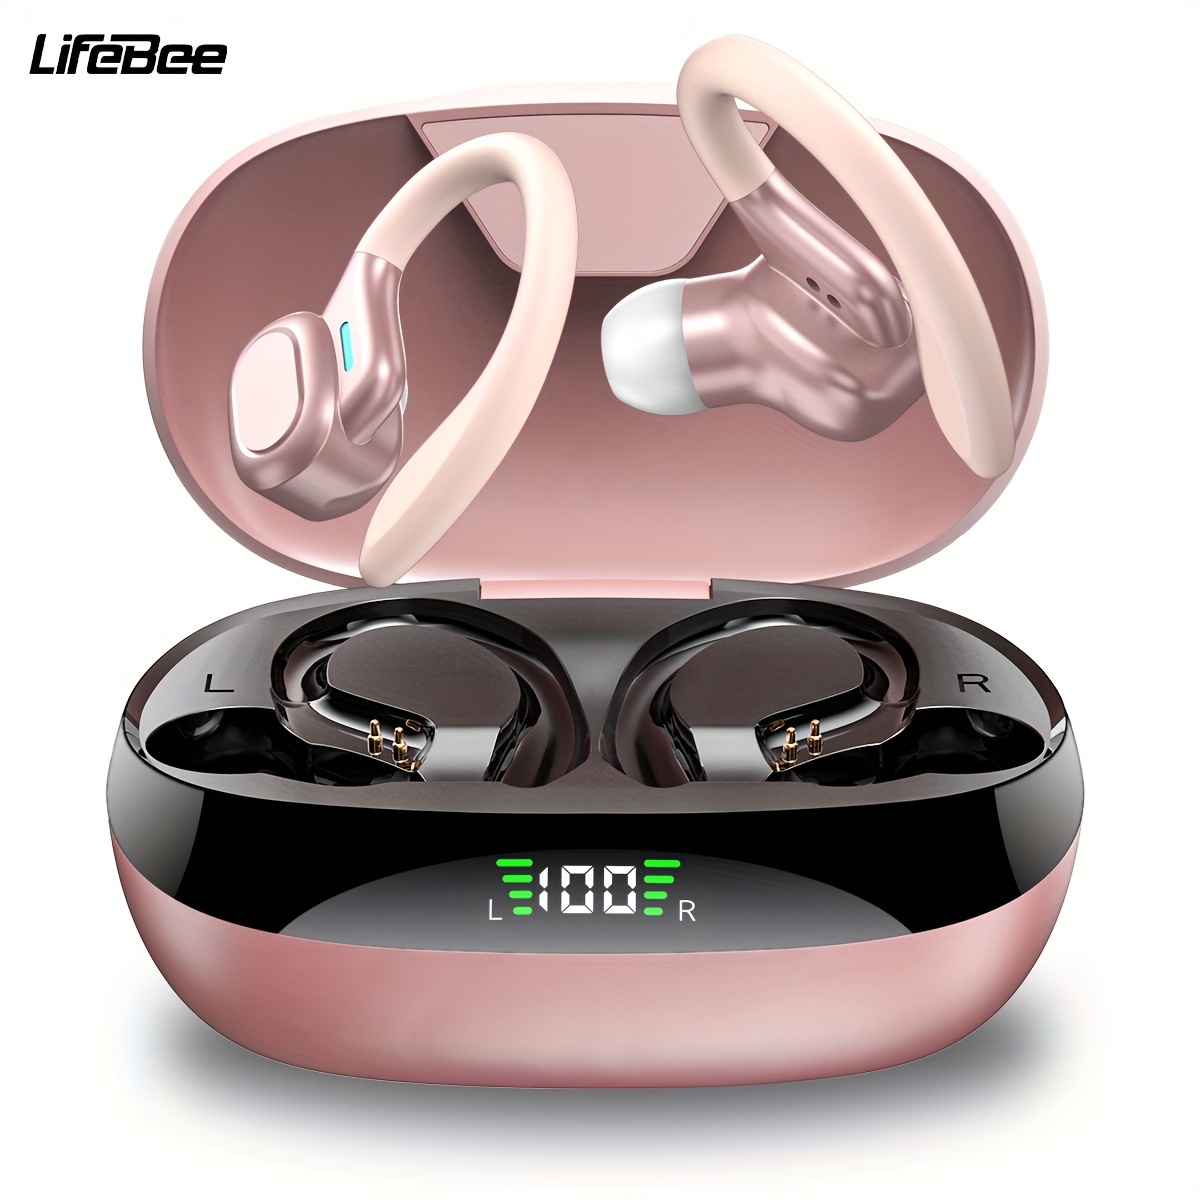 

Lifebee Wireless Earbuds With Mic, In-ear Headphones, Earphones With Led Display, Mini Charging Case Headset For Men/women